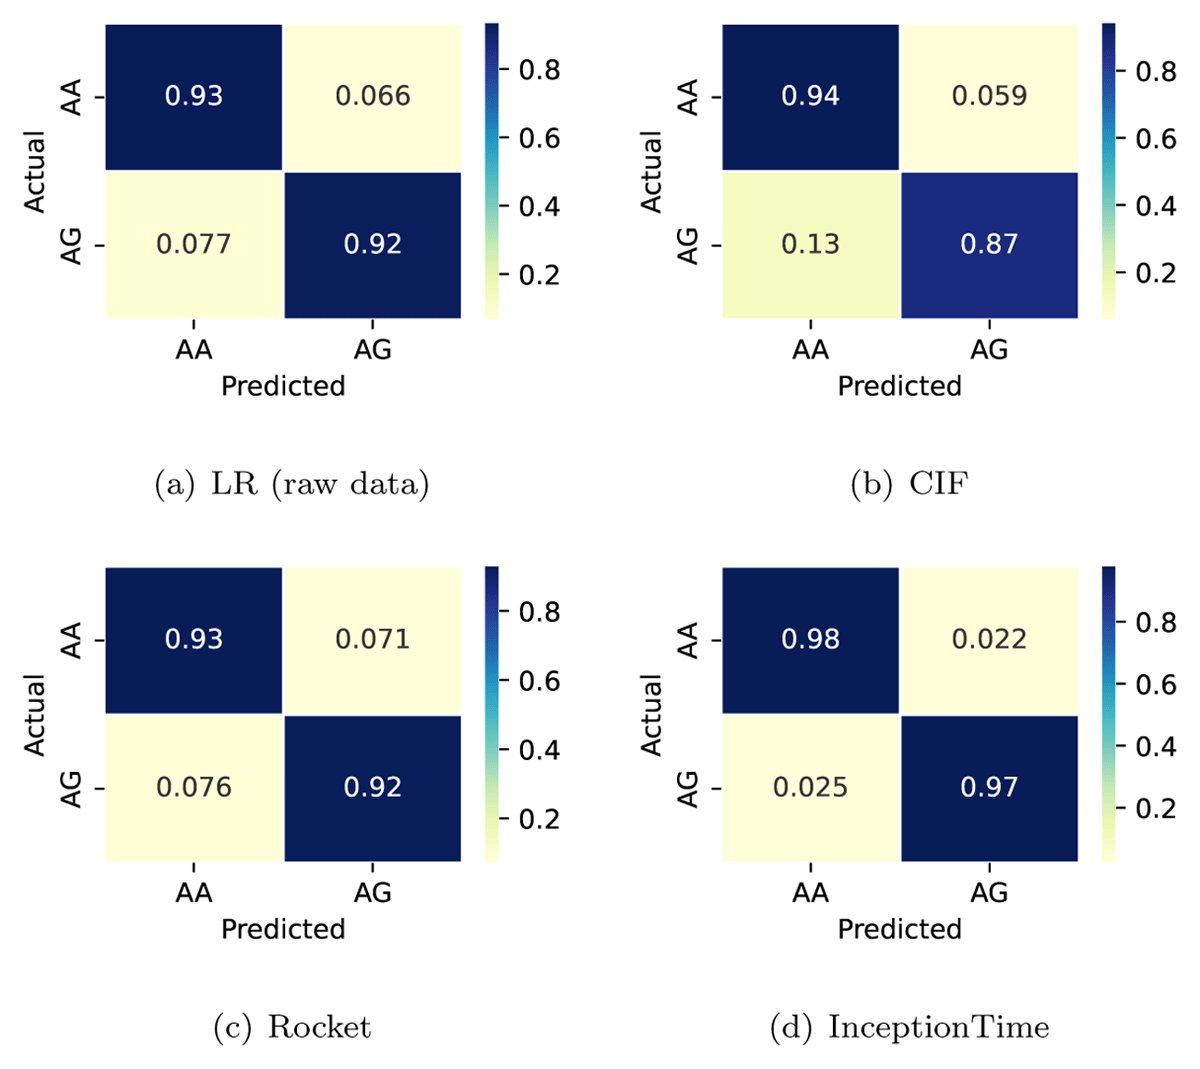 Confusion matrix obtained by the best classifier of each approach (i.e., feature-based, interval-based, convolution-based, and deep learning) for species classification